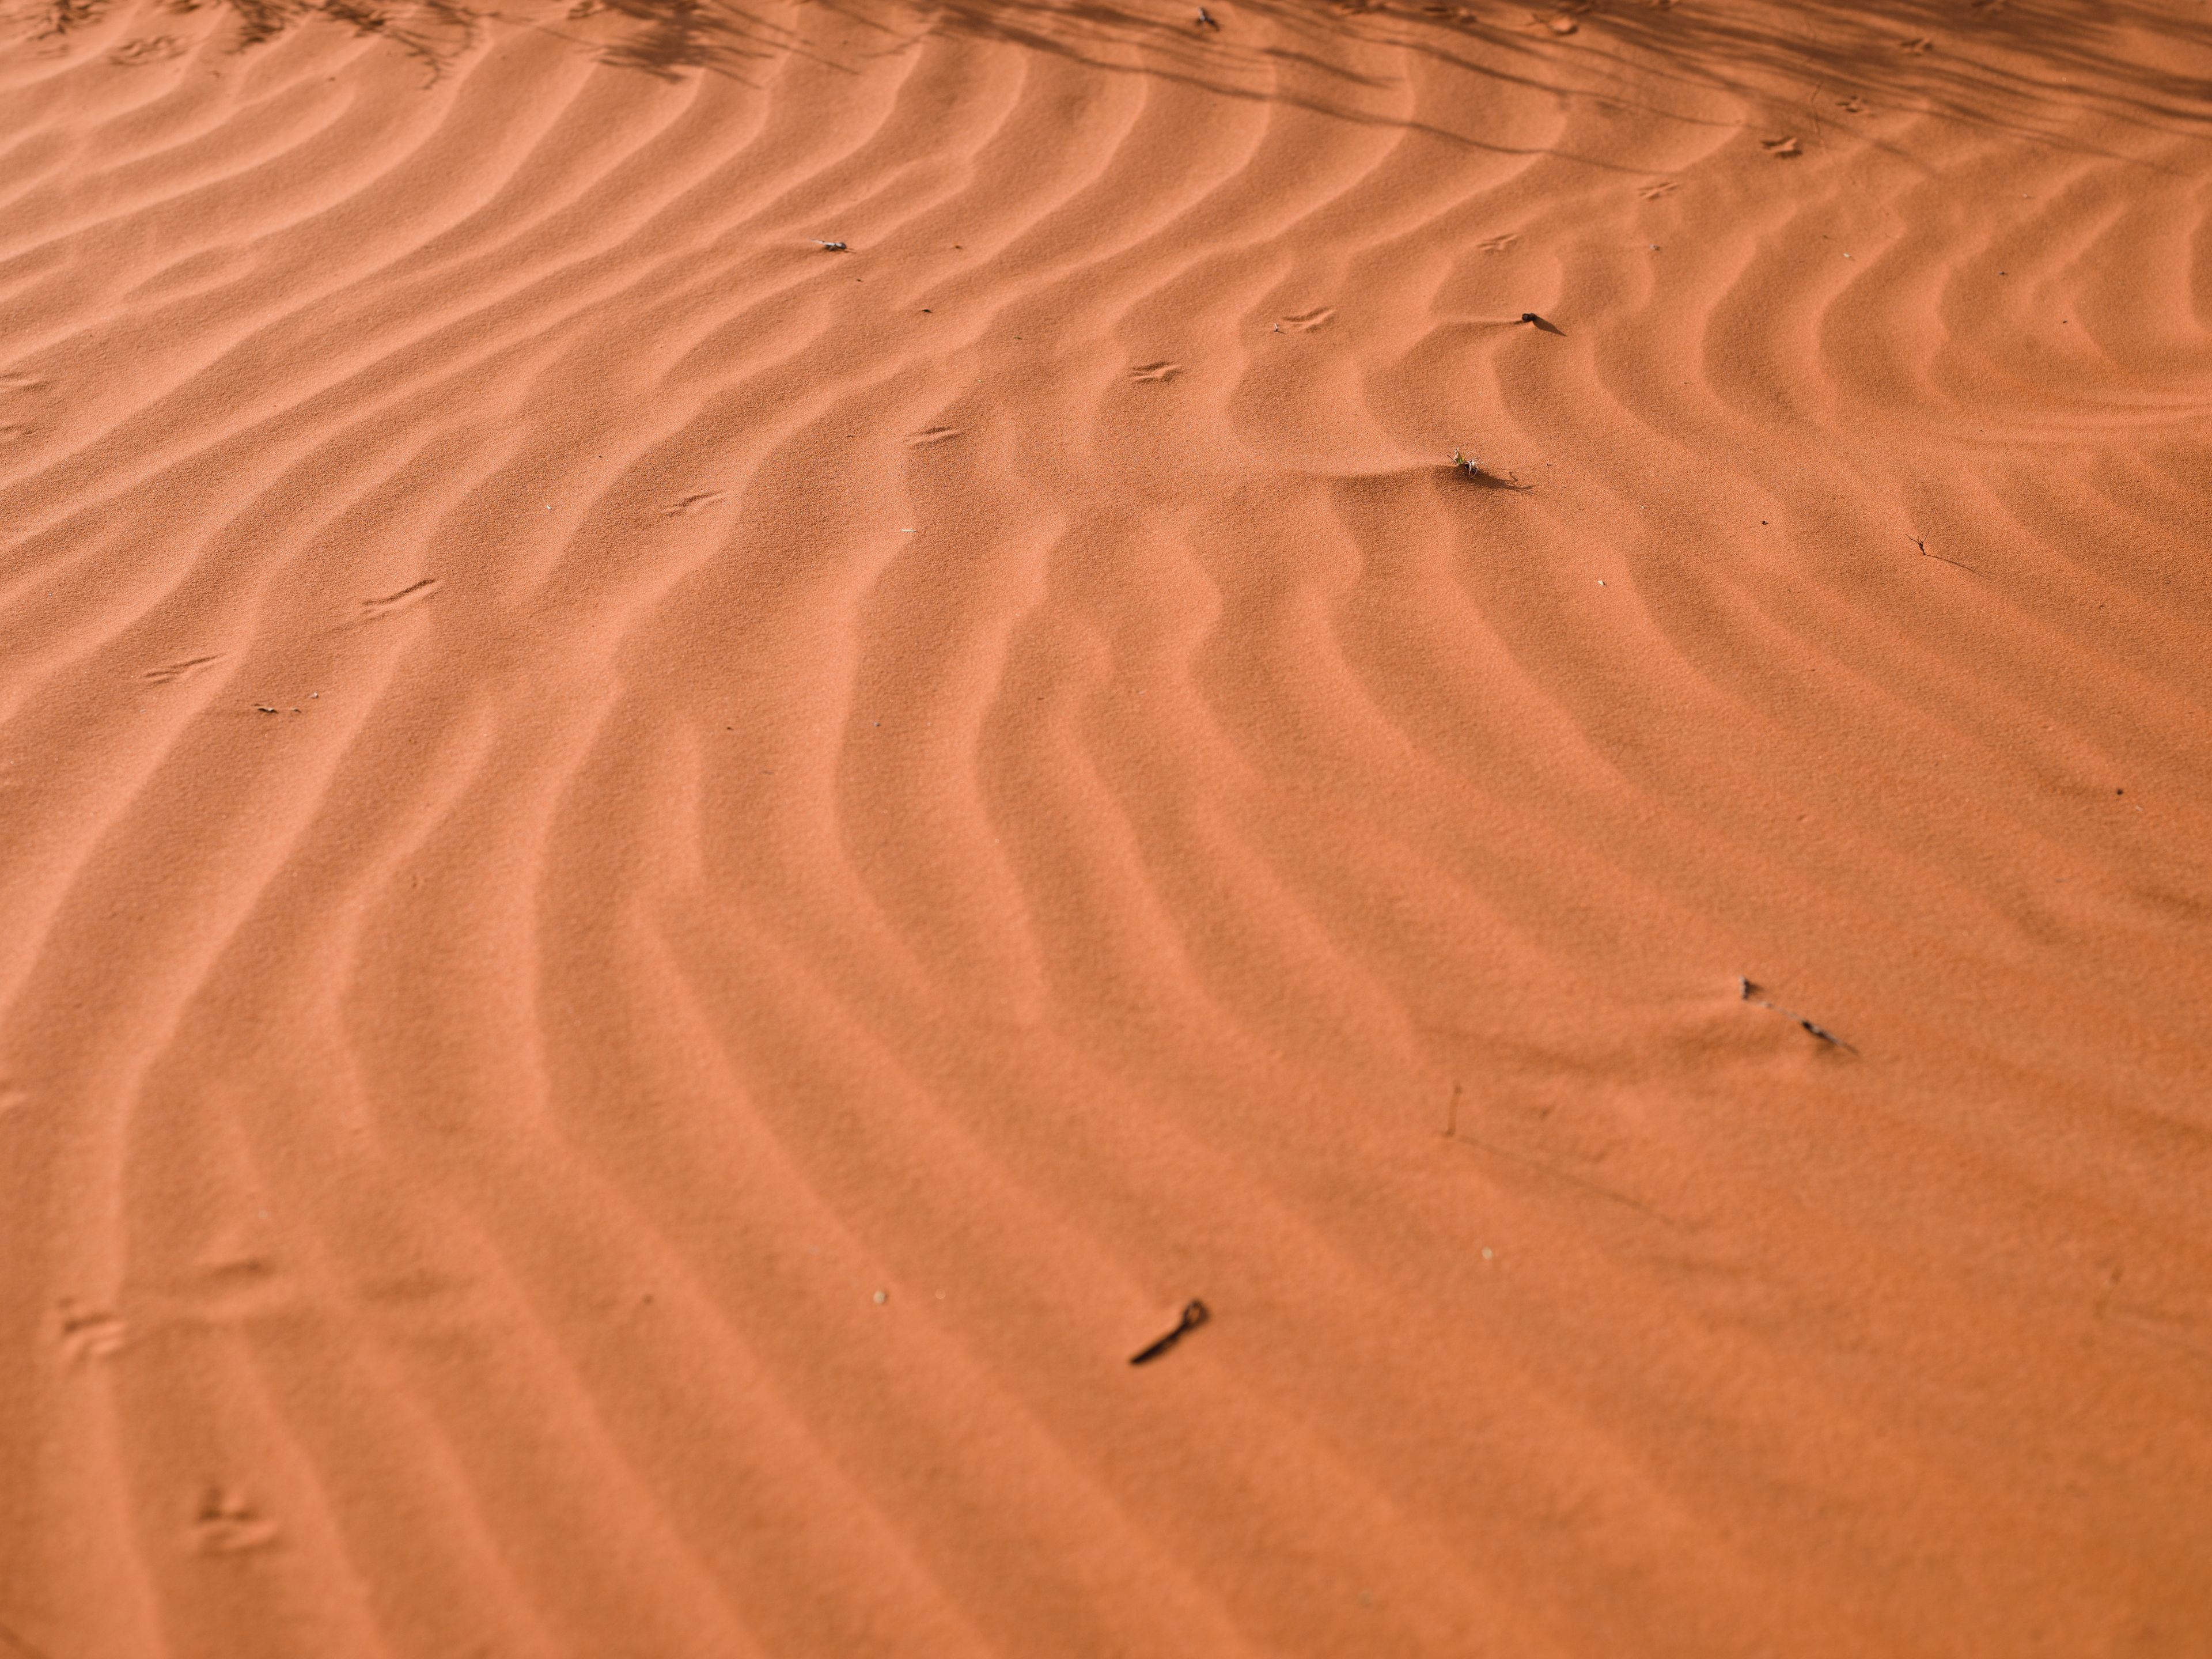 Small ridges formed in red sand.